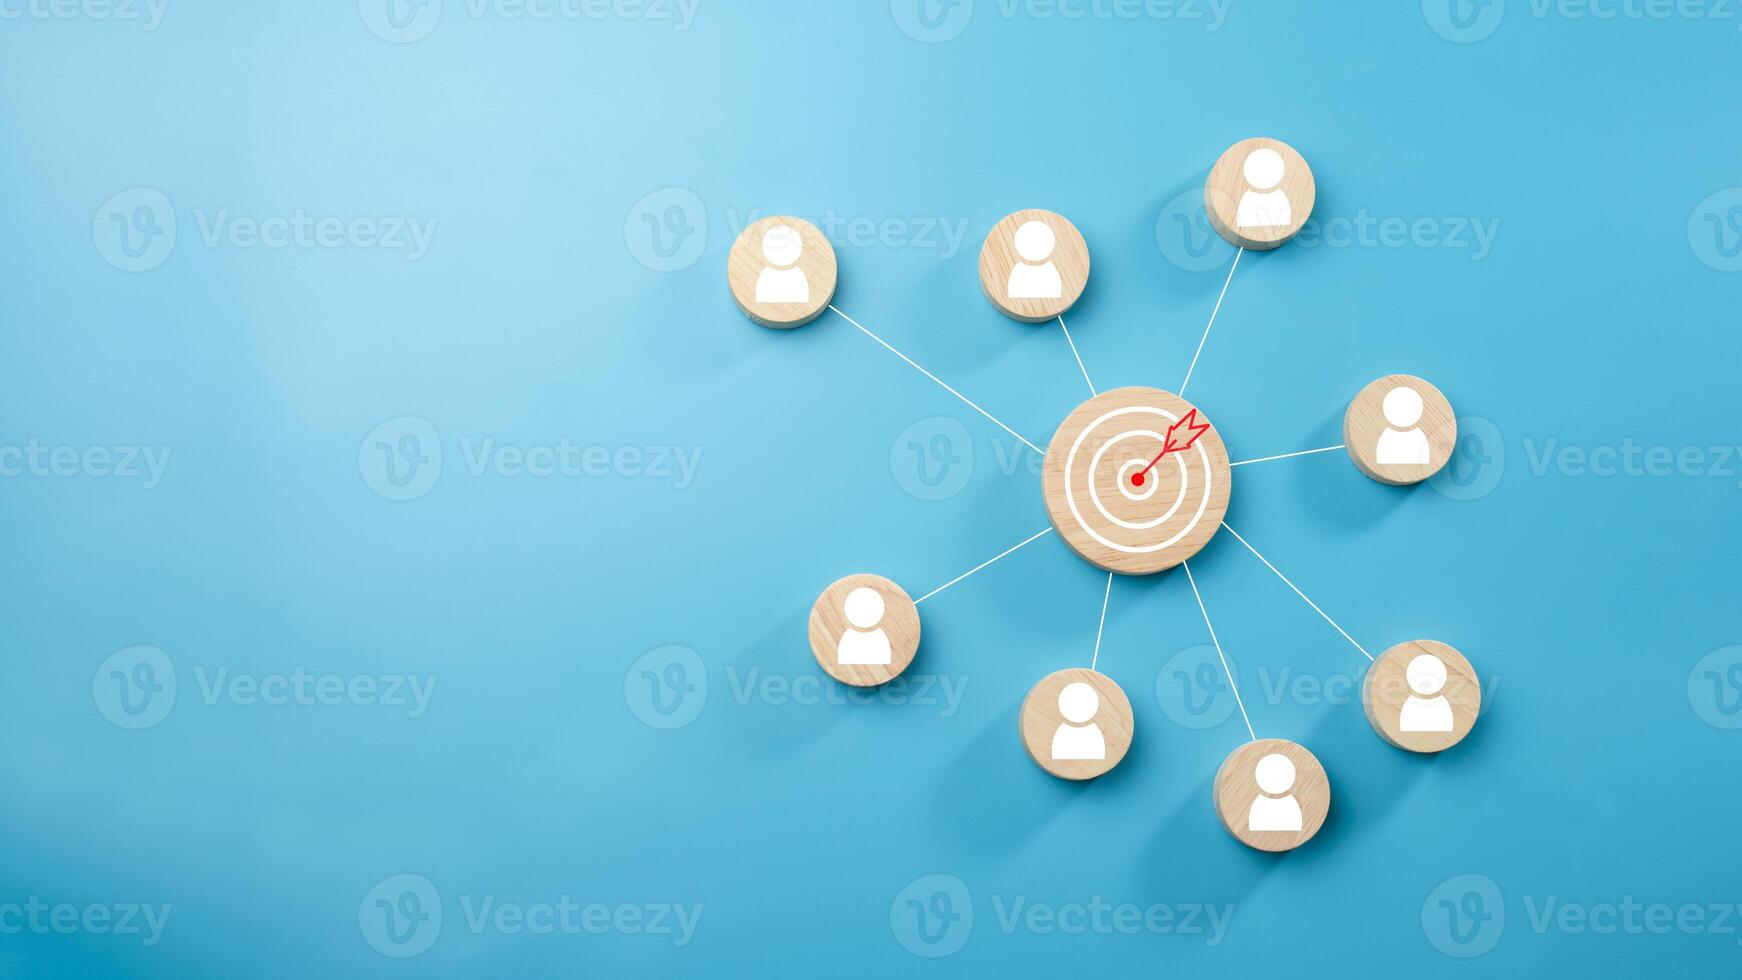 Circular wood with printed target icons and business symbols on light blue background, business goals and objectives concept, business competition, Customer relationship management concept. photo